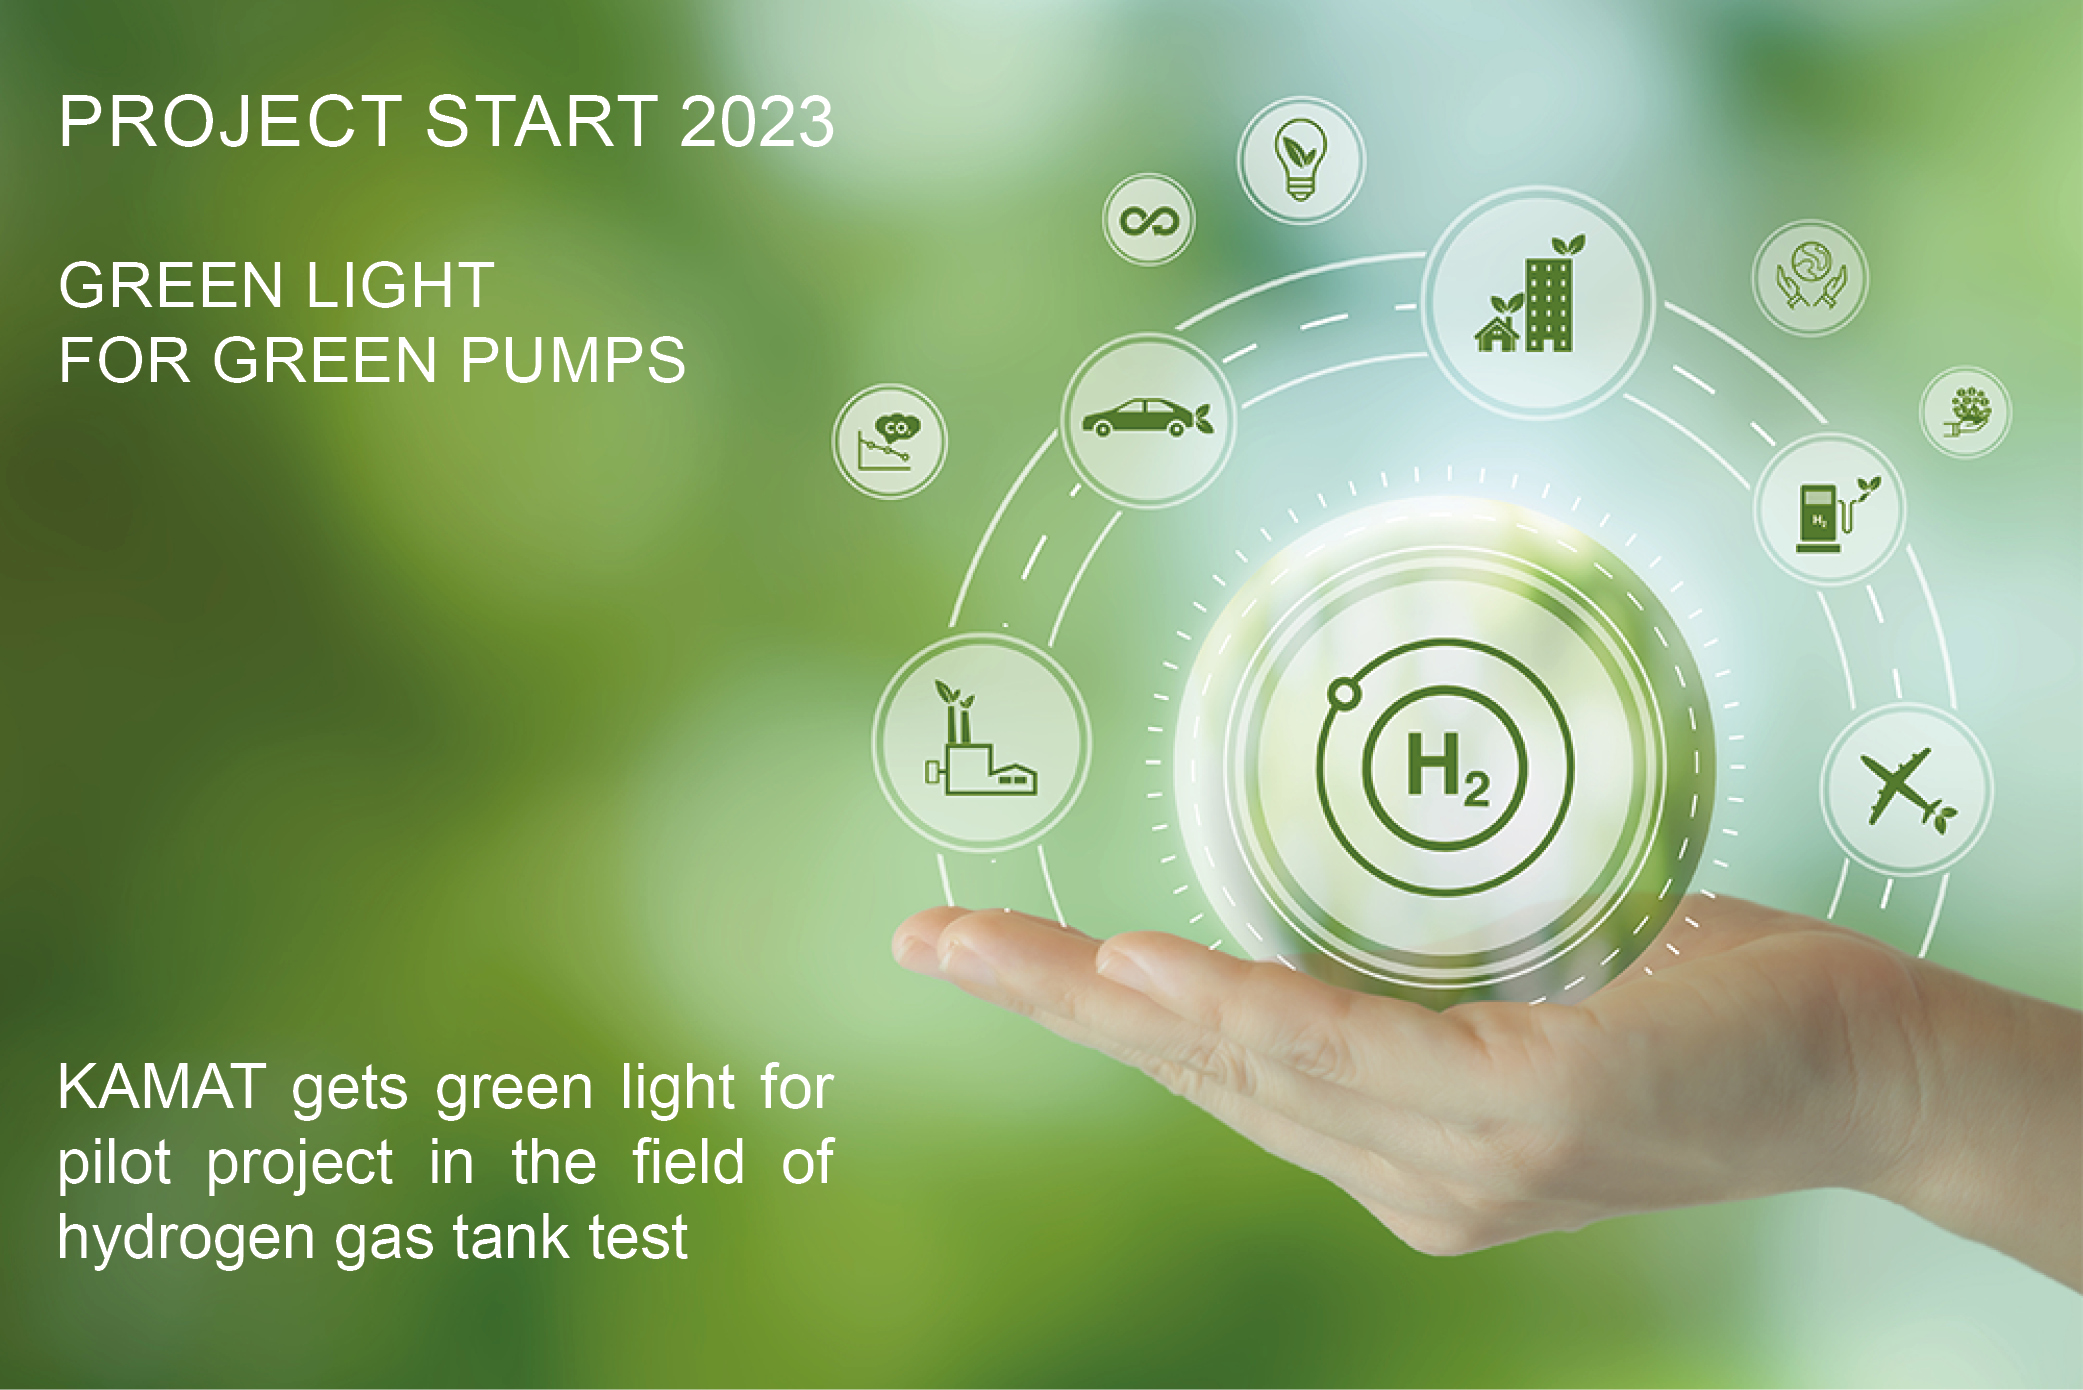 Feature image for news about project start in the H2 area: Mood image Hydrogen symbol image, you can see a hand with a green background circling various infographics on the subject of industry, transport and energy, as well as a text that KAMAT has received the green light for a major project in the field of hydrogen tank testing.